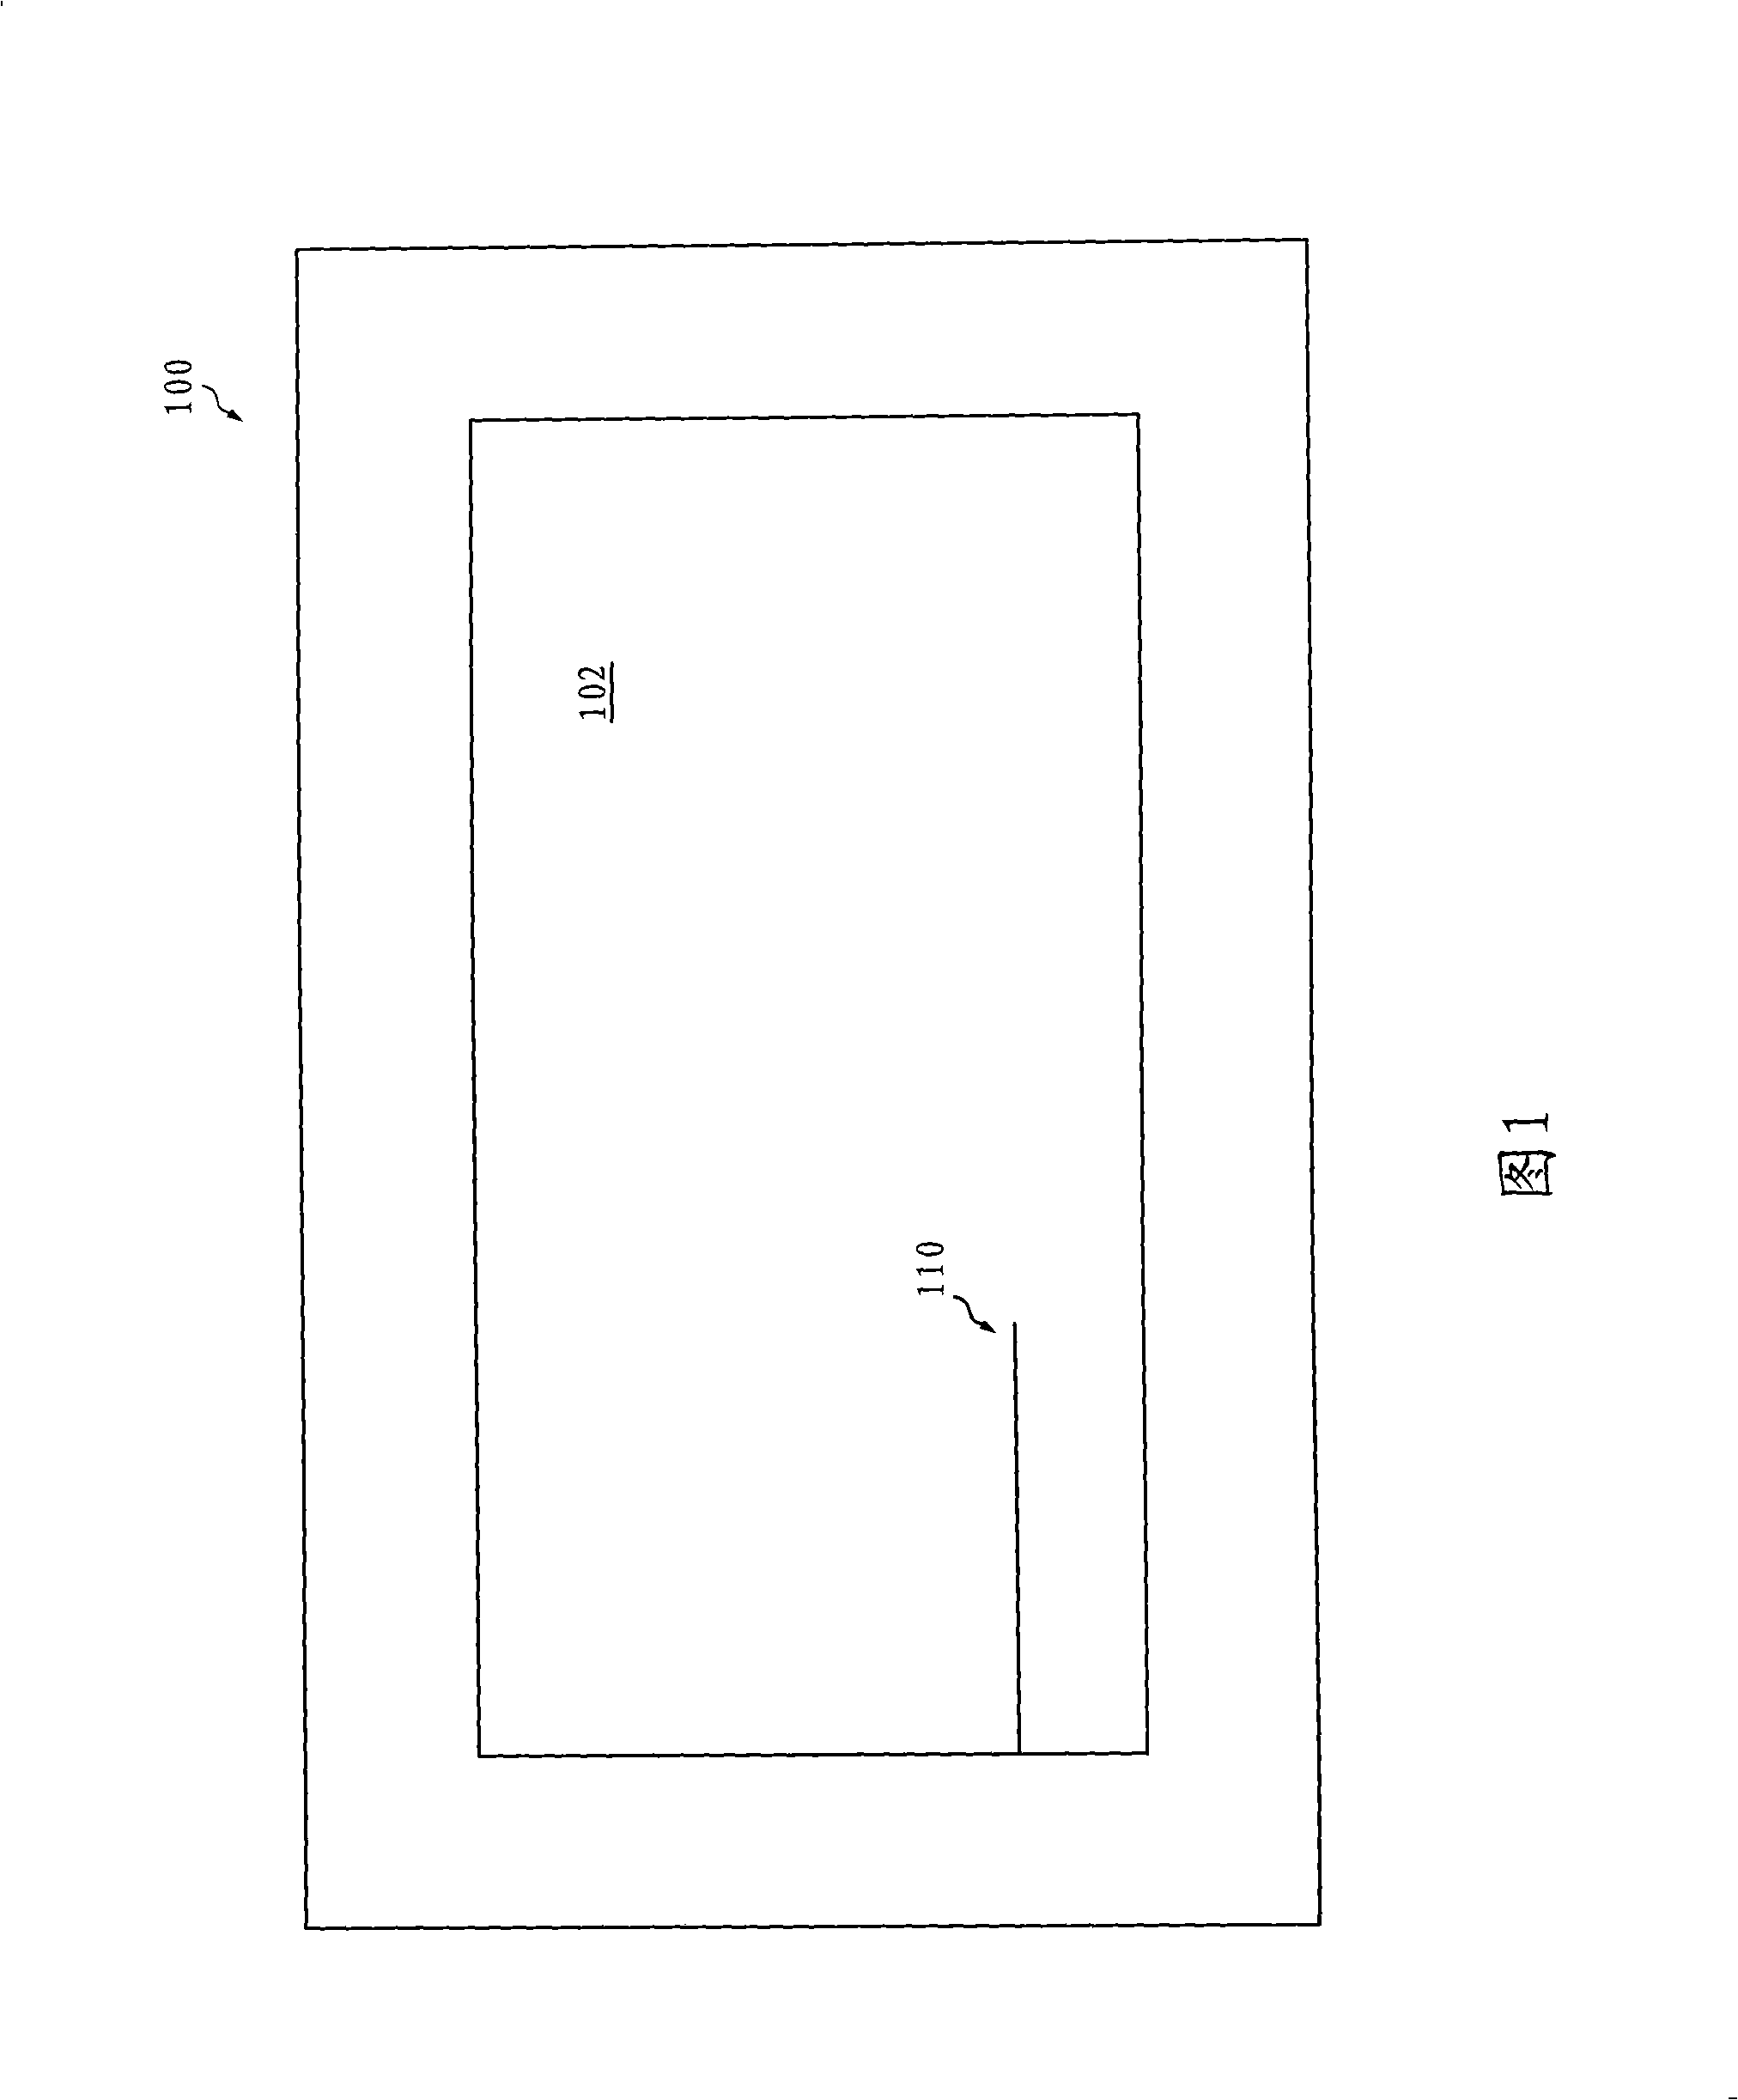 LCD panel and its common electrode lines mending method